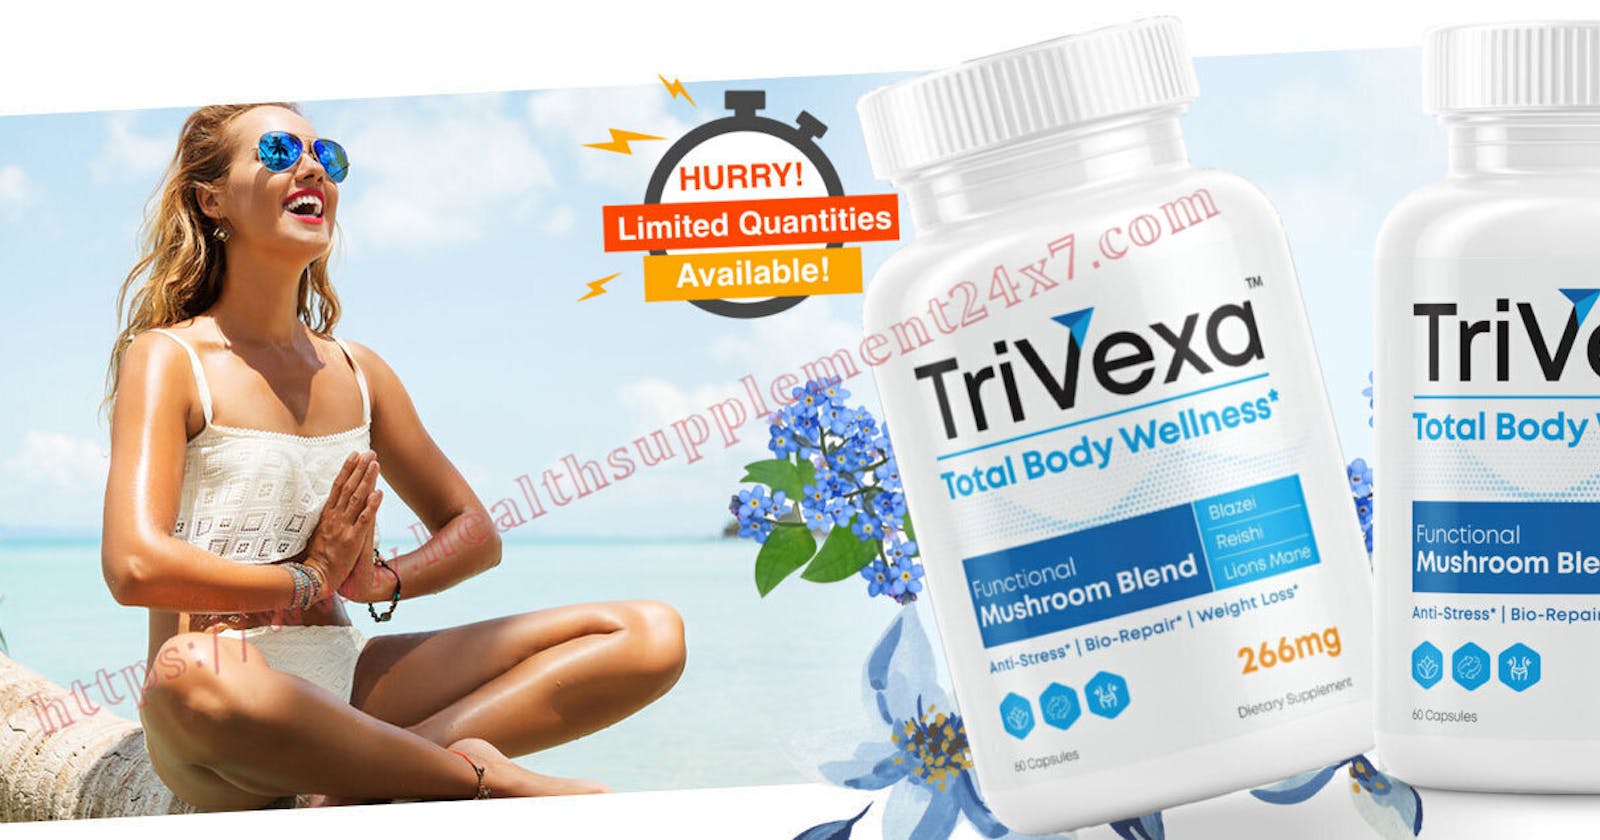 TriVexa [100% Natural Pure] Supports Healthy Weight Loss By Improving Your Metabolism(Spam Or Legit)